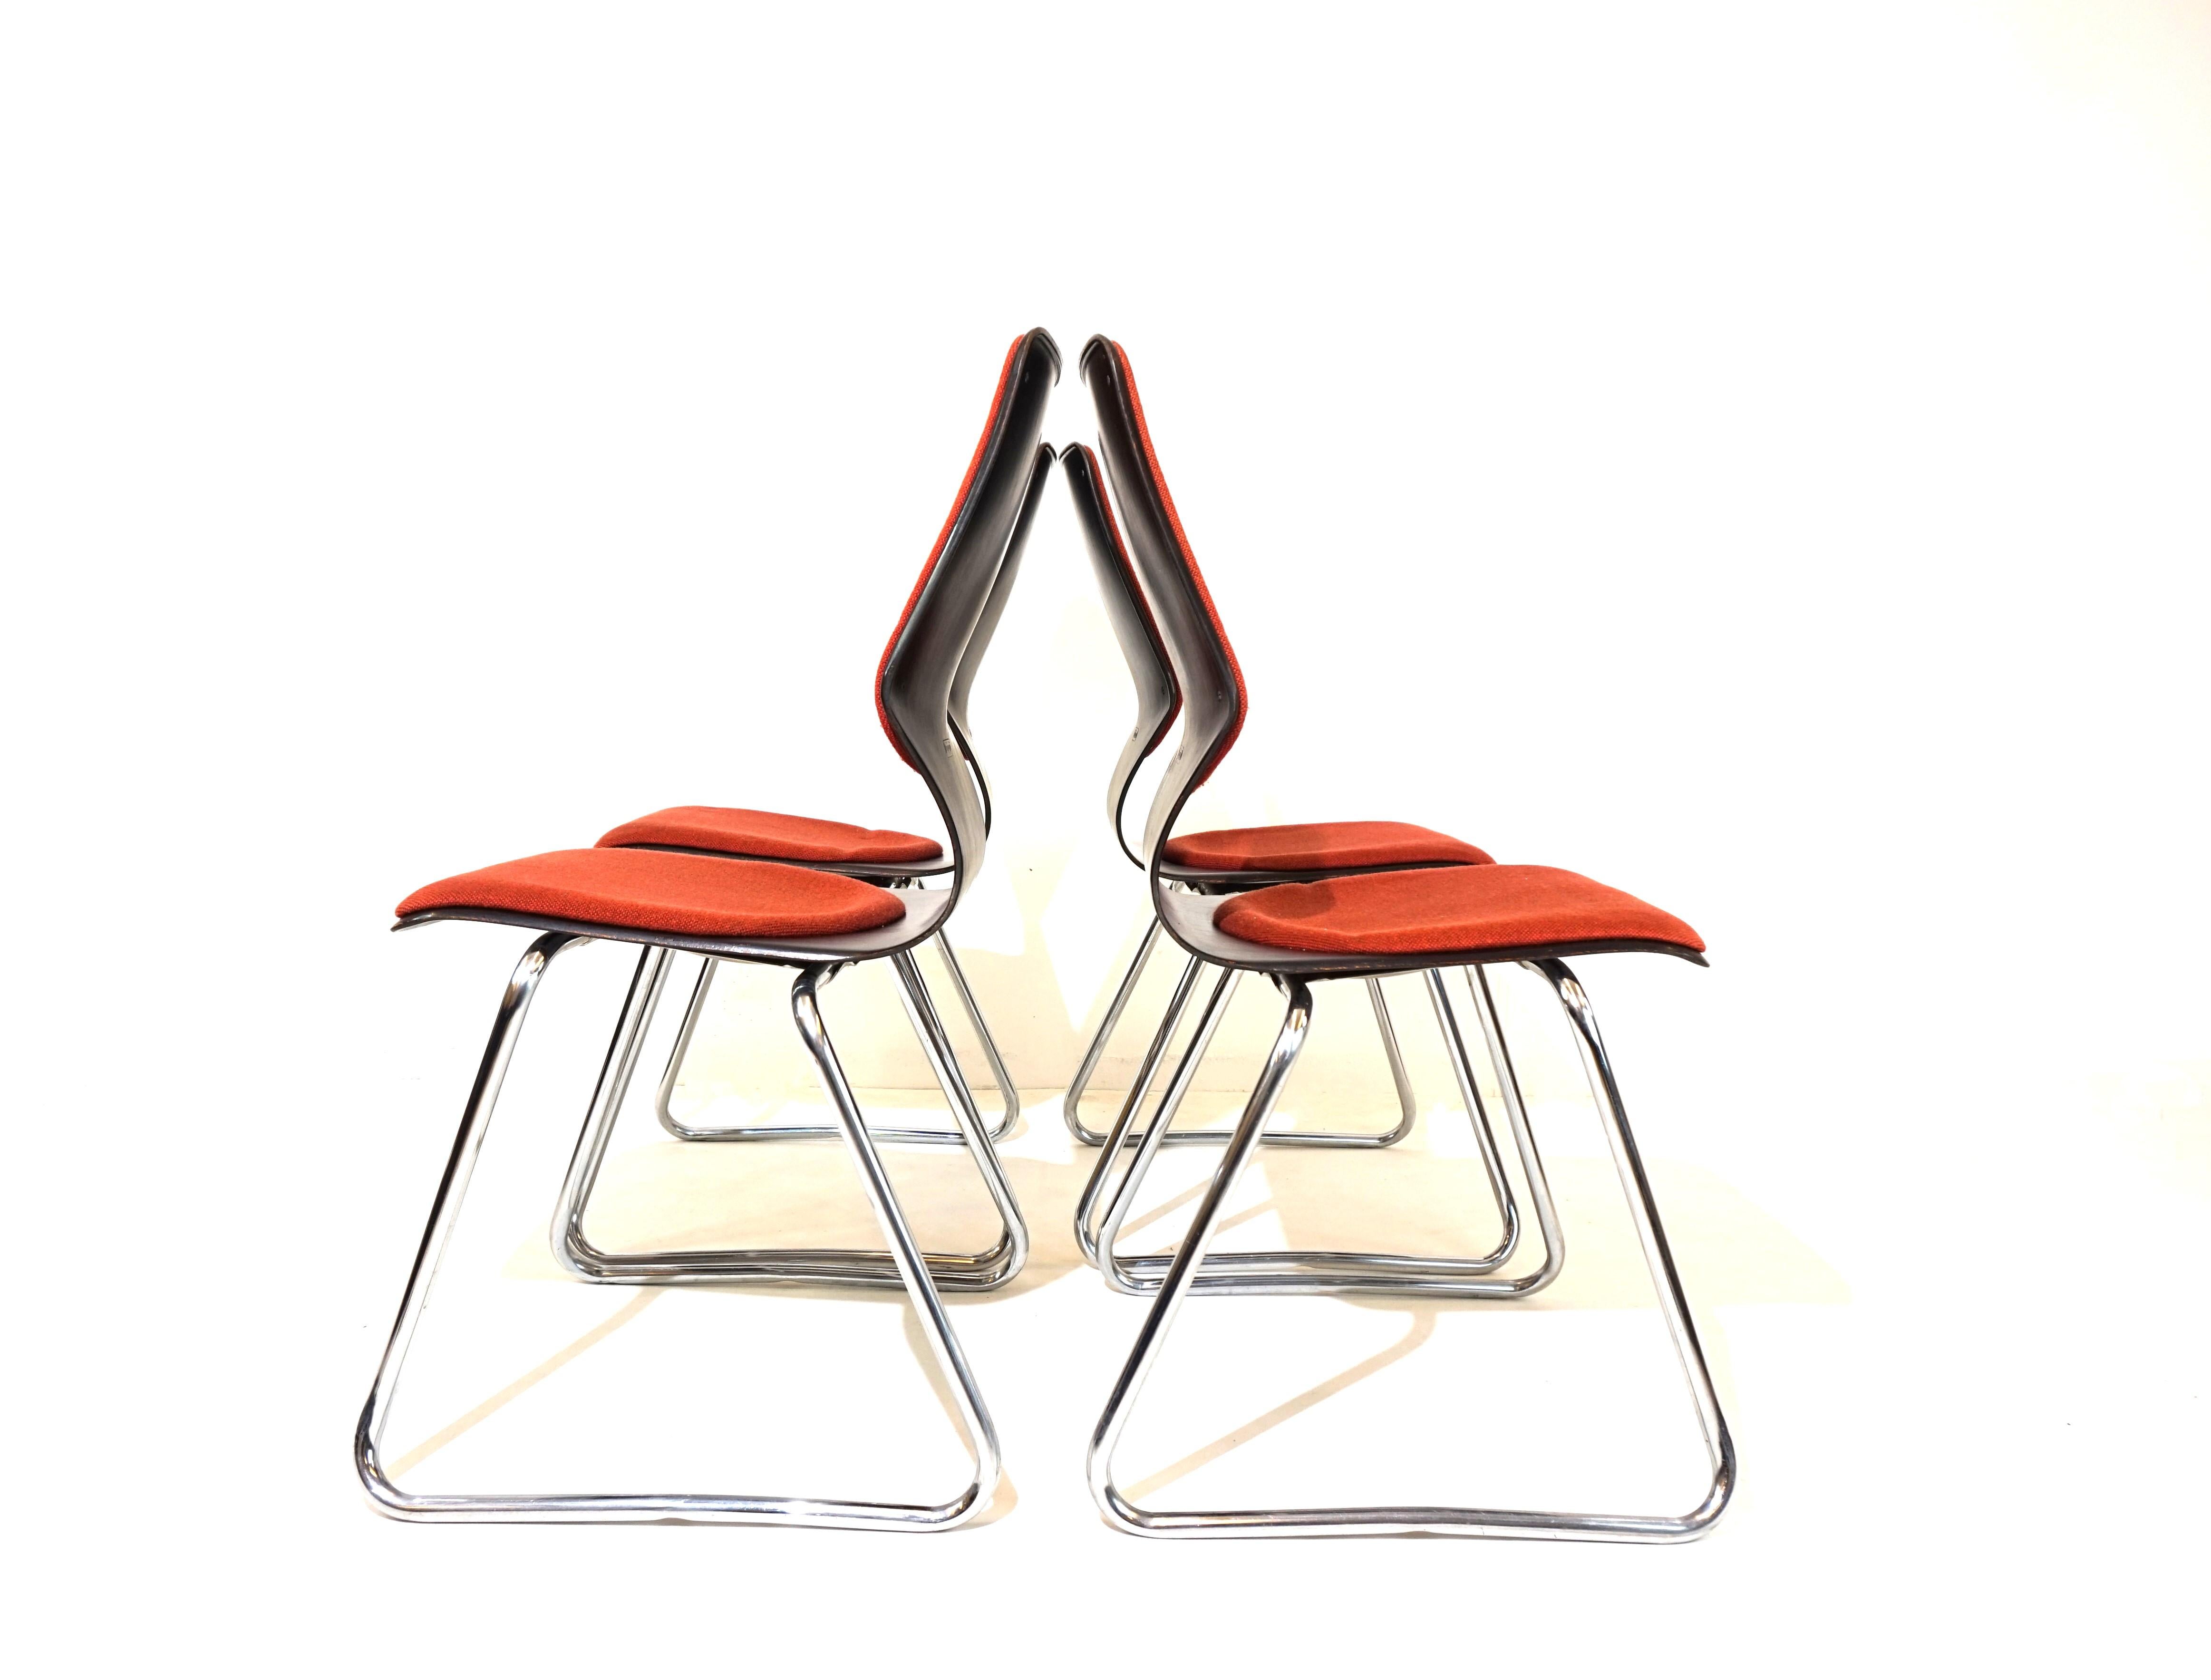 Flötotto set of 4 Pagholz chairs by Elmar Flötotto For Sale 9